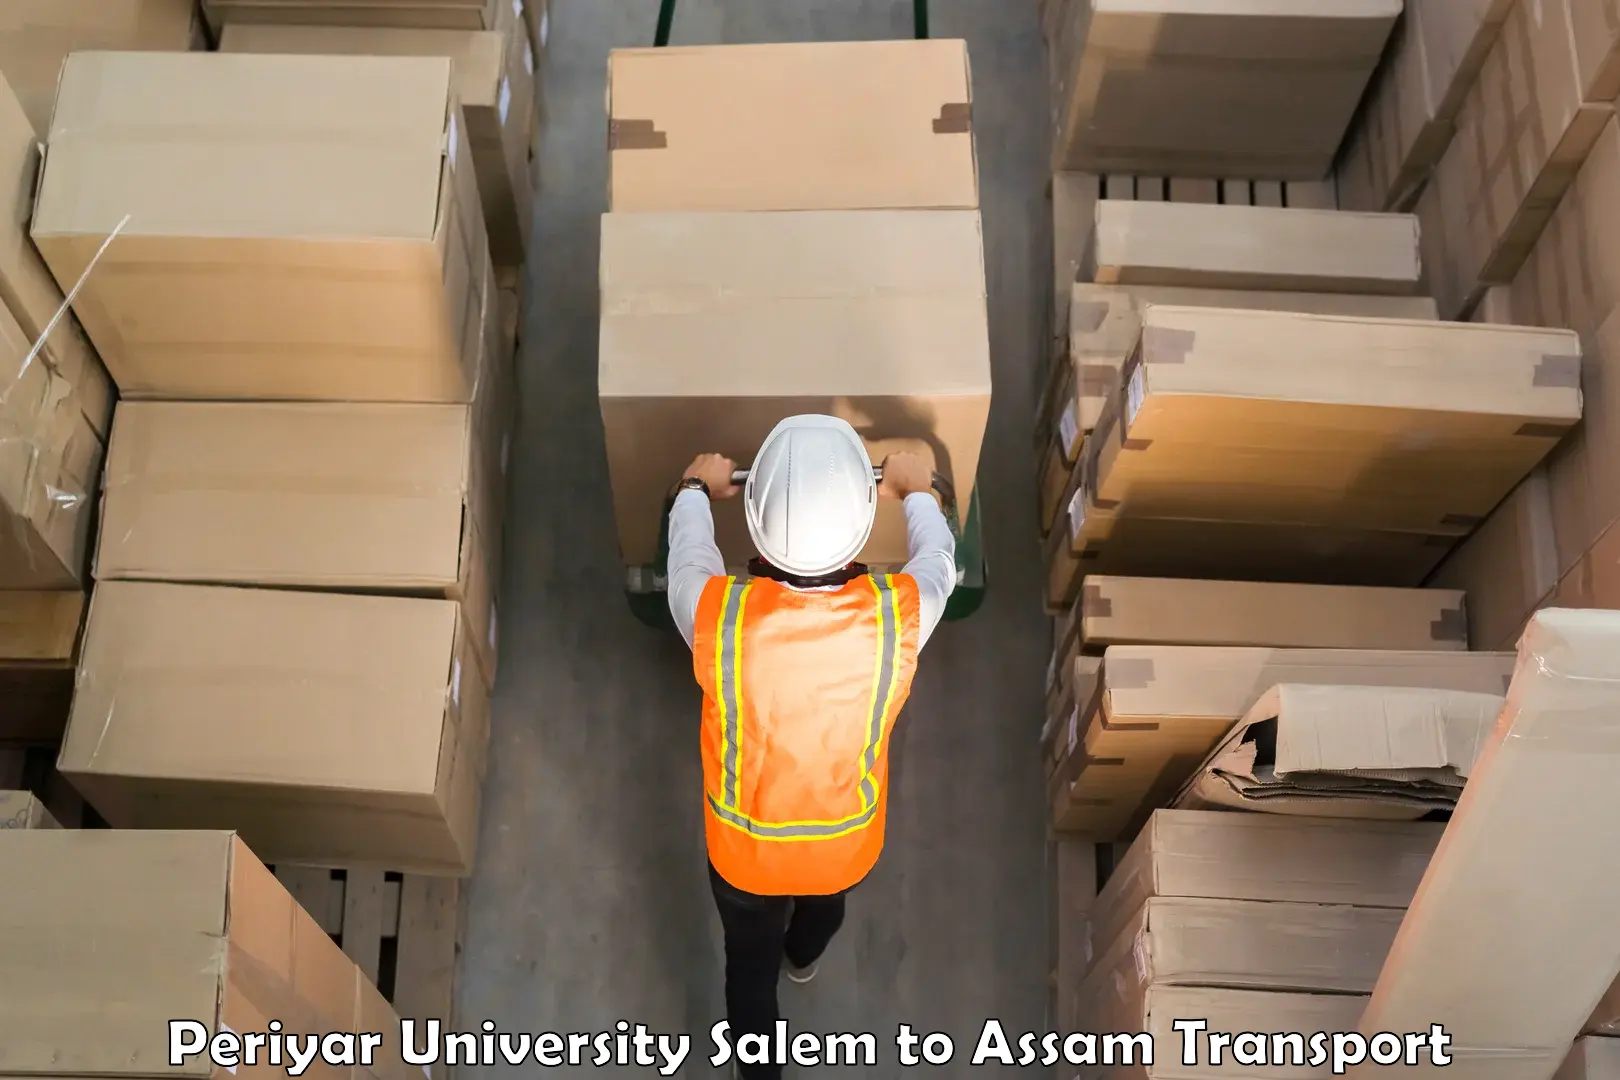 Container transport service Periyar University Salem to Mariani